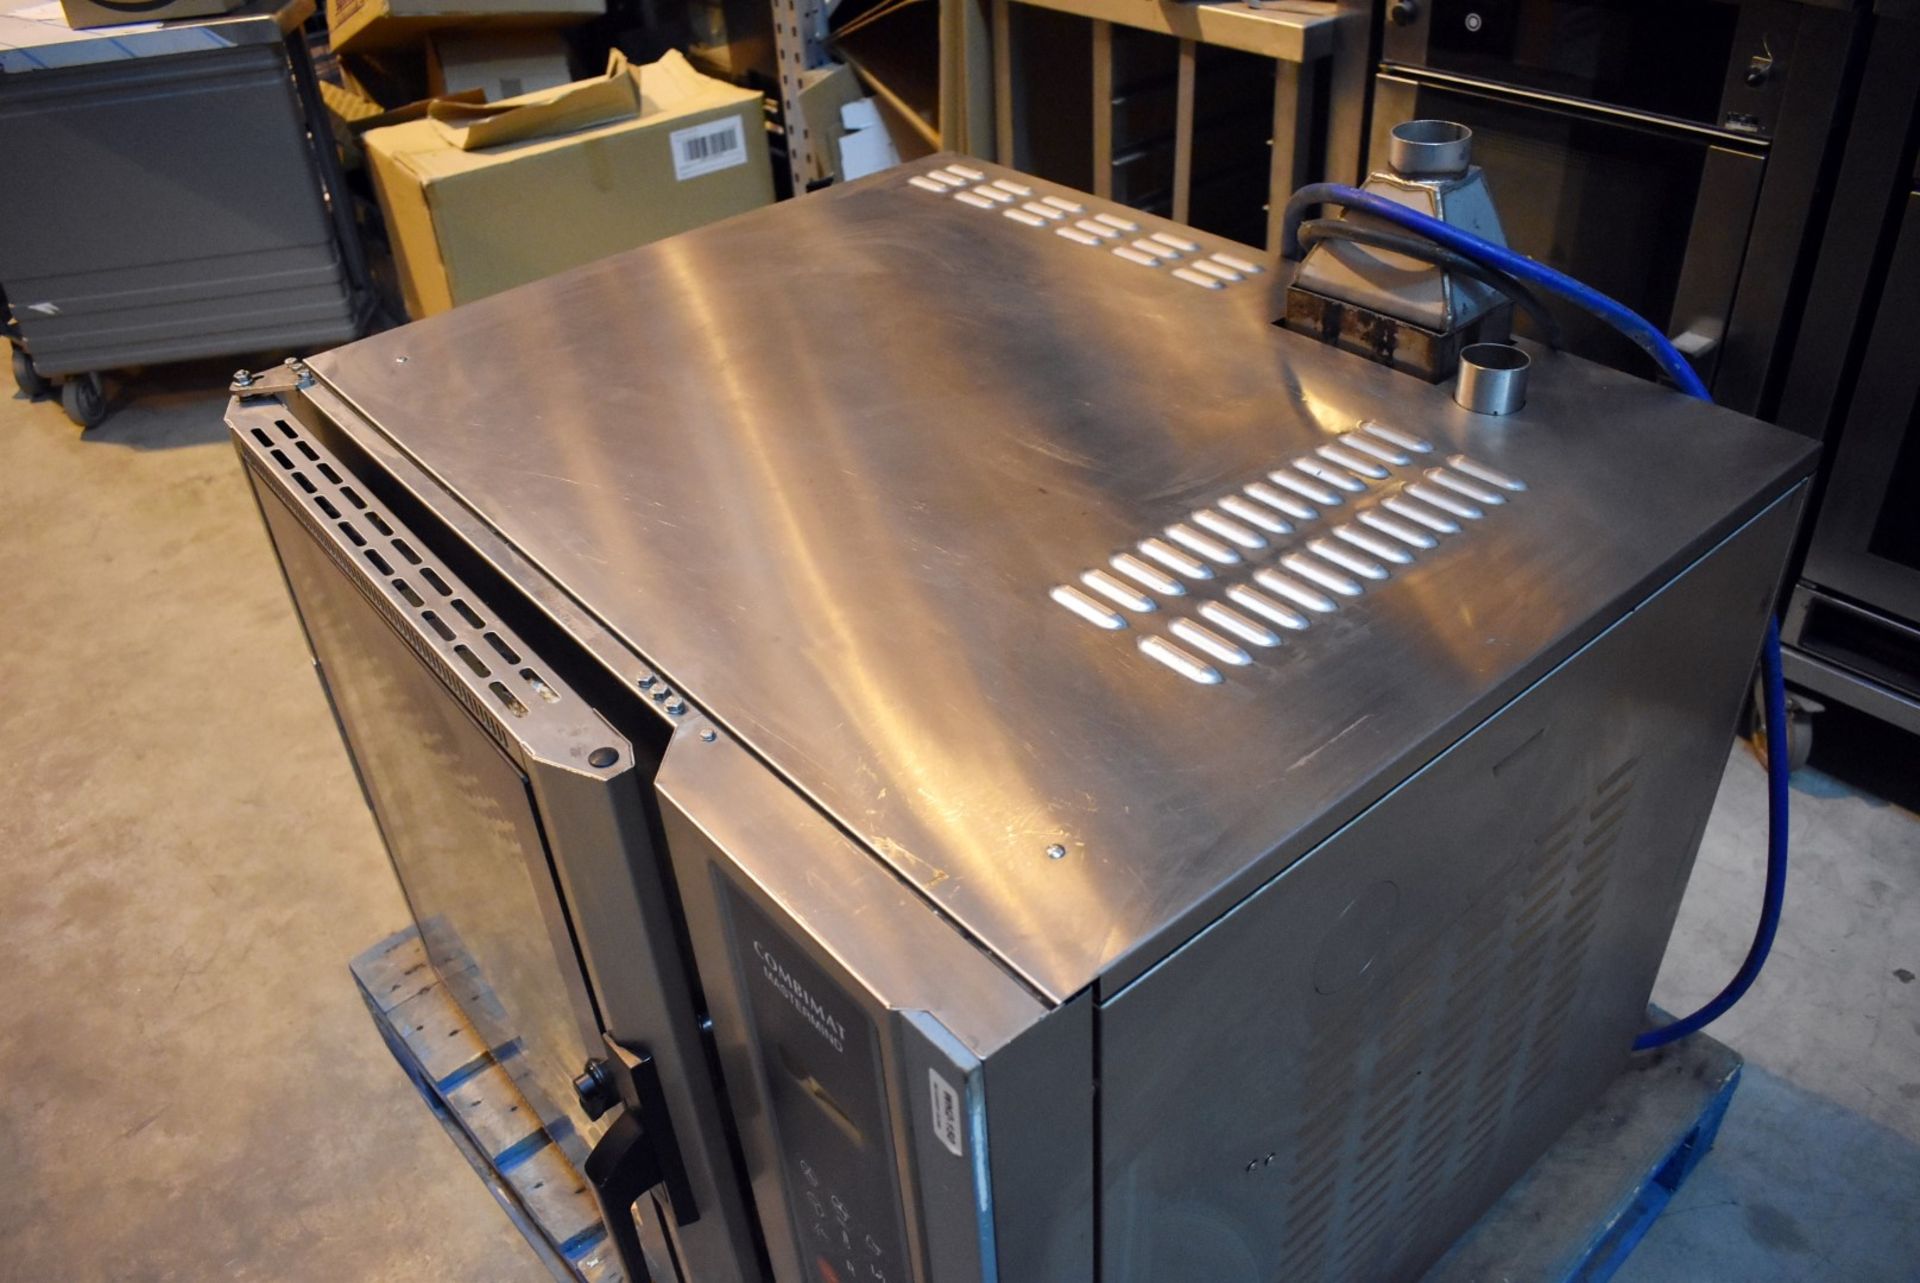 1 x Leventi Combimat mk3.1 Mastermind 6 Grid Combi Steam Oven - 3 Phase - Recently Removed From a - Image 9 of 11